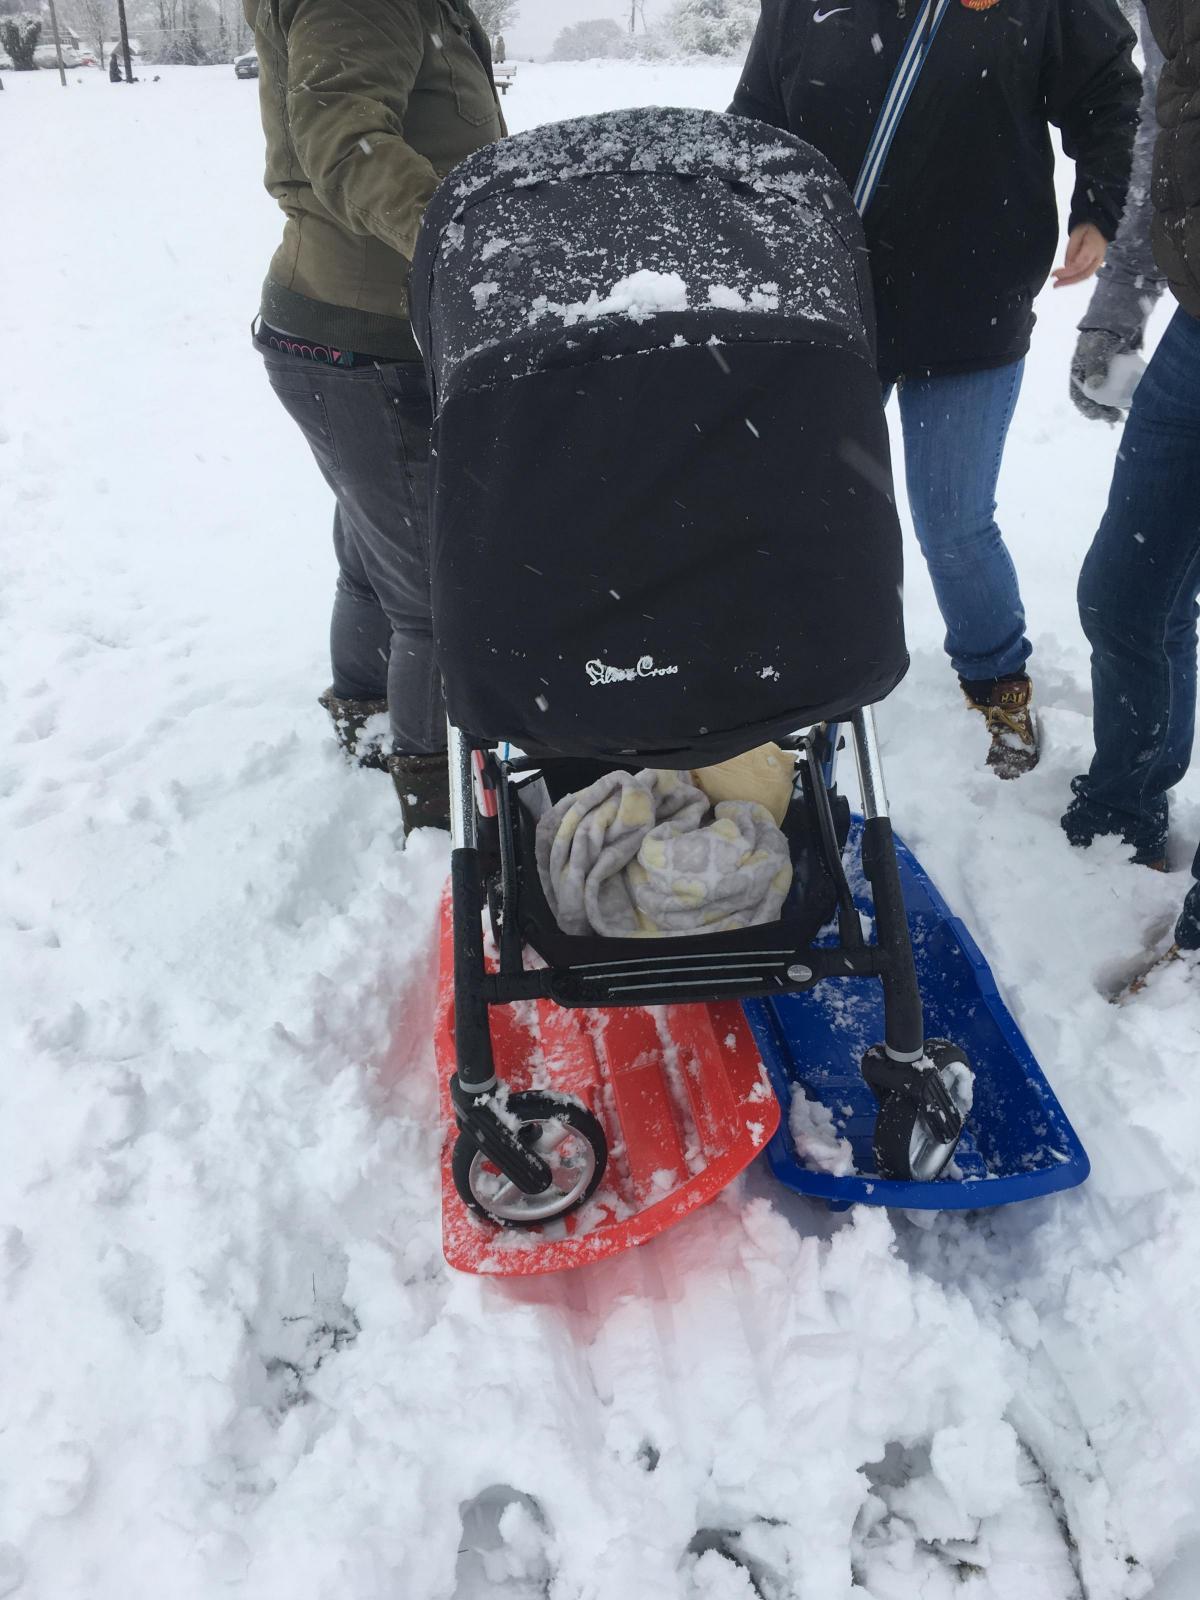 Kate Tully - "This was the only way we could get out and about to enjoy the snow in Lane End today with a pushchair"